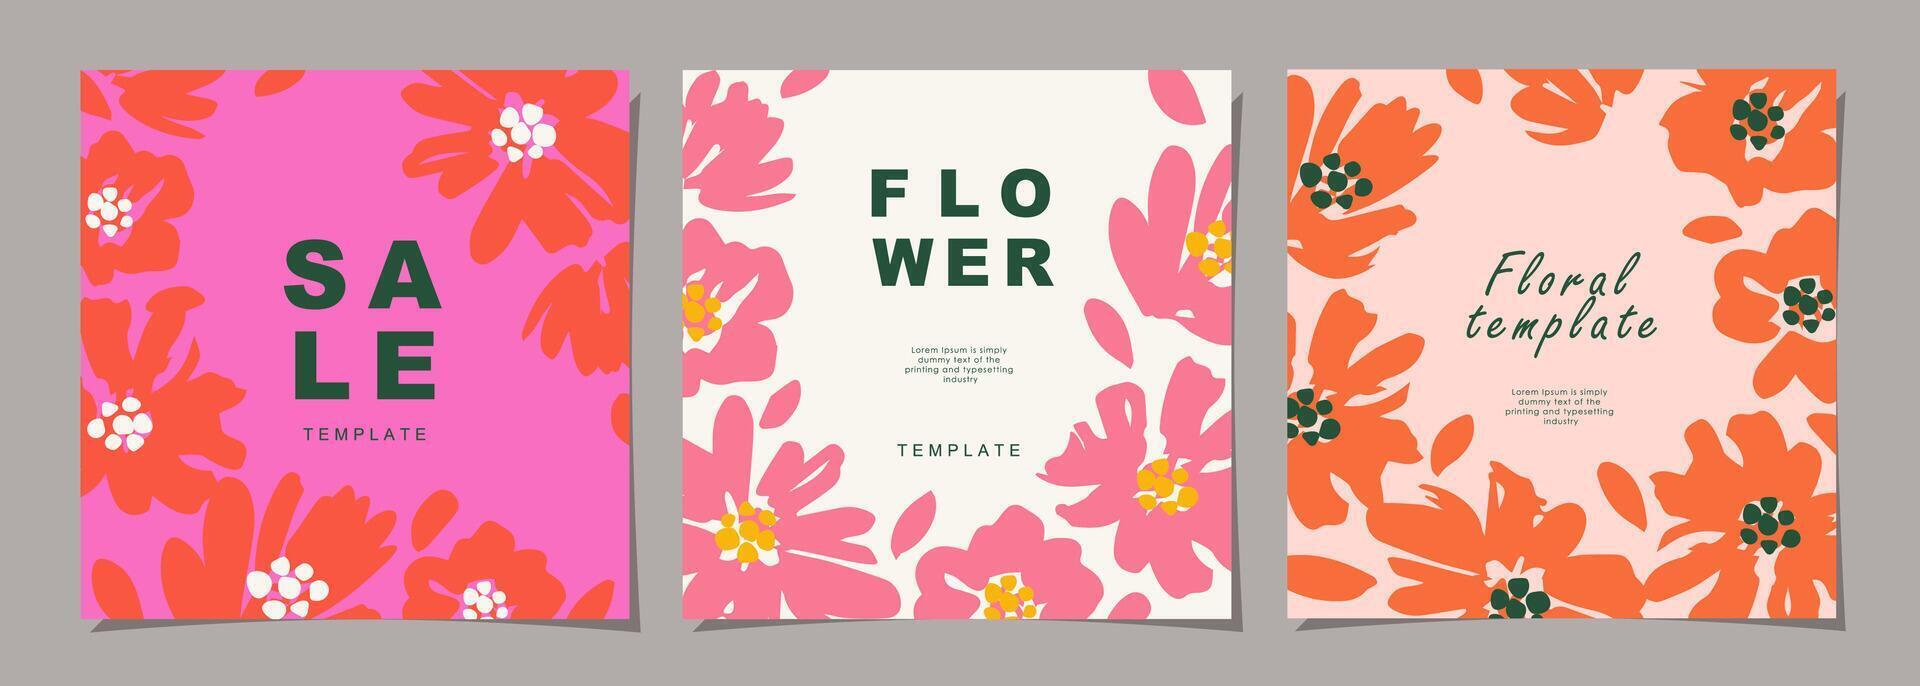 Floral template set for poster, card, cover, wall art, banner in modern minimalist style and simple summer design templates with flowers and plants. vector